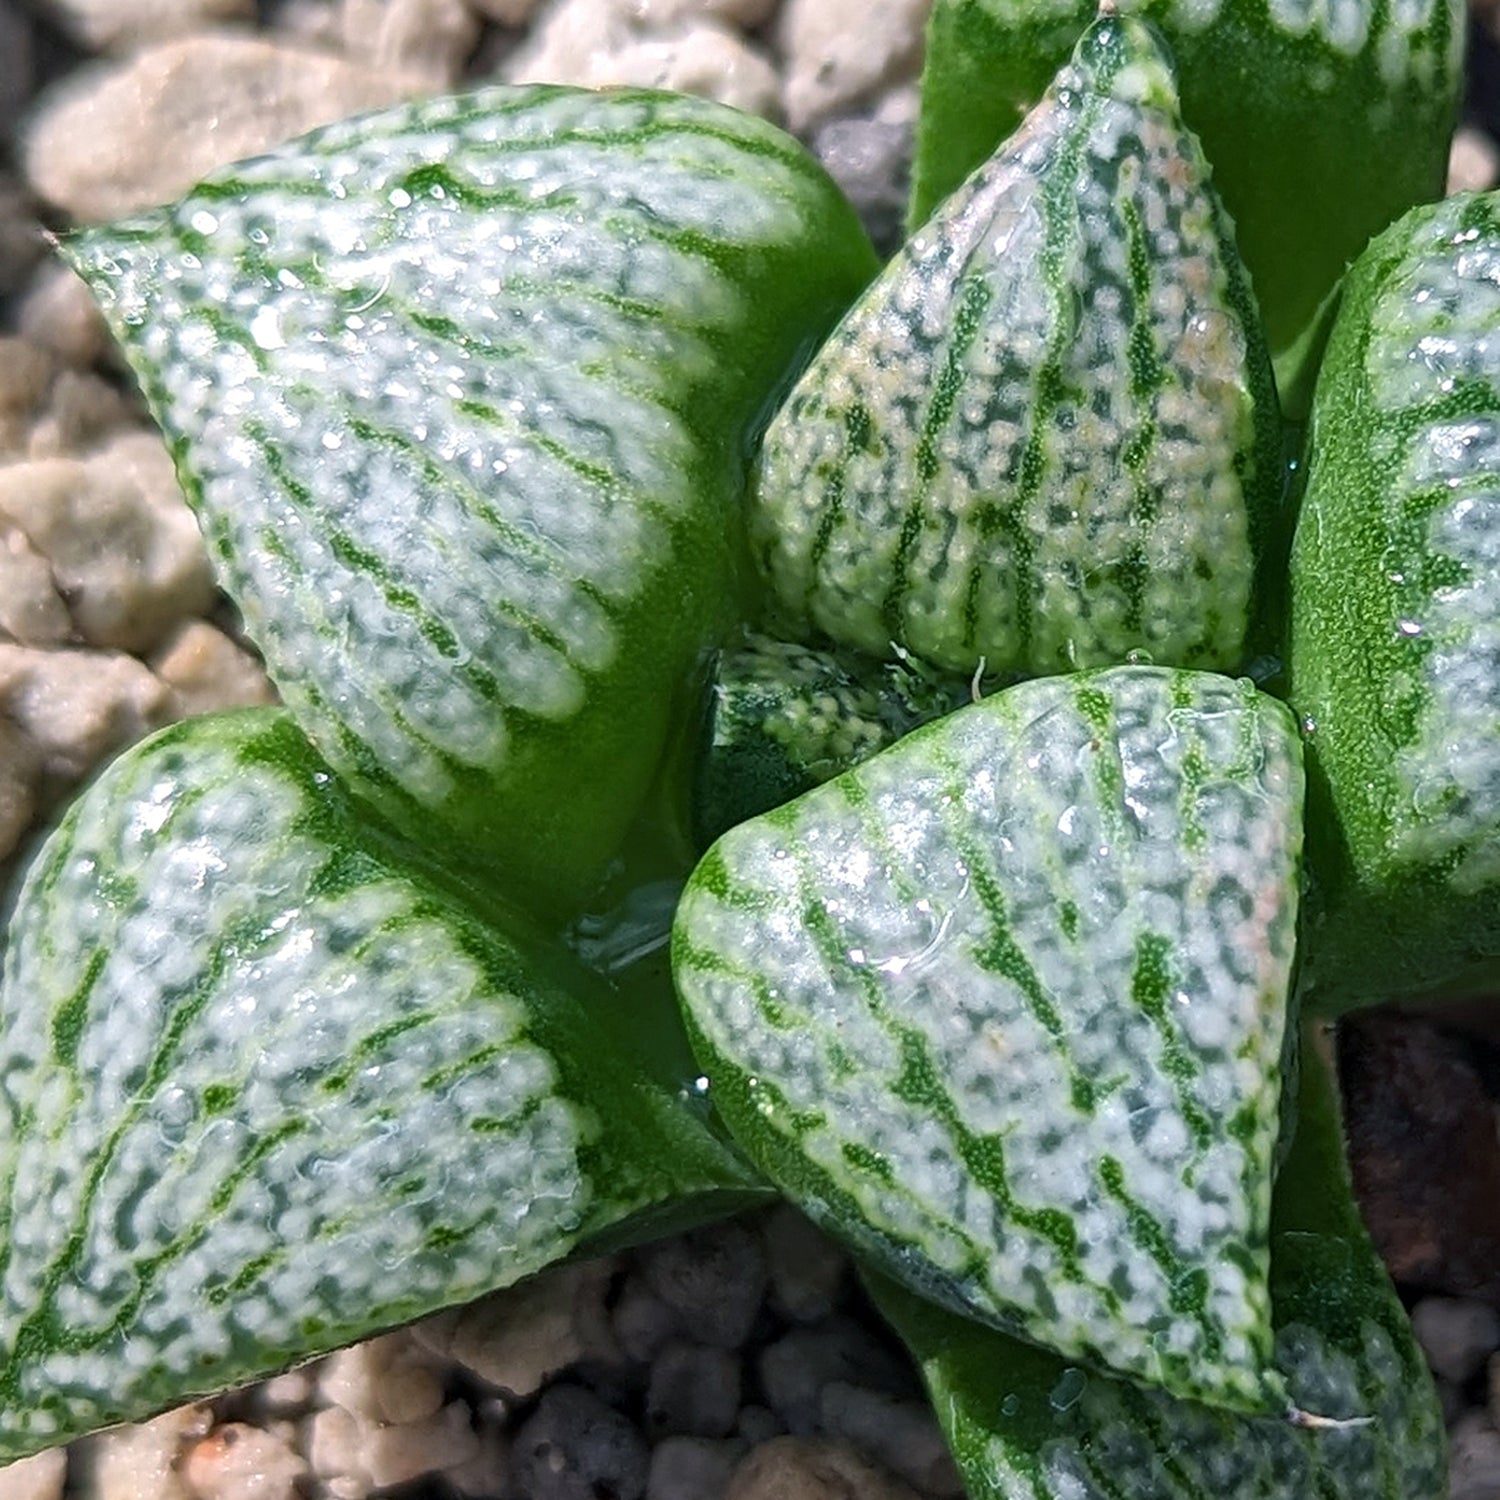 Haworthia "PP332" picta x Empress hybrid series #d11 SOLD OUT